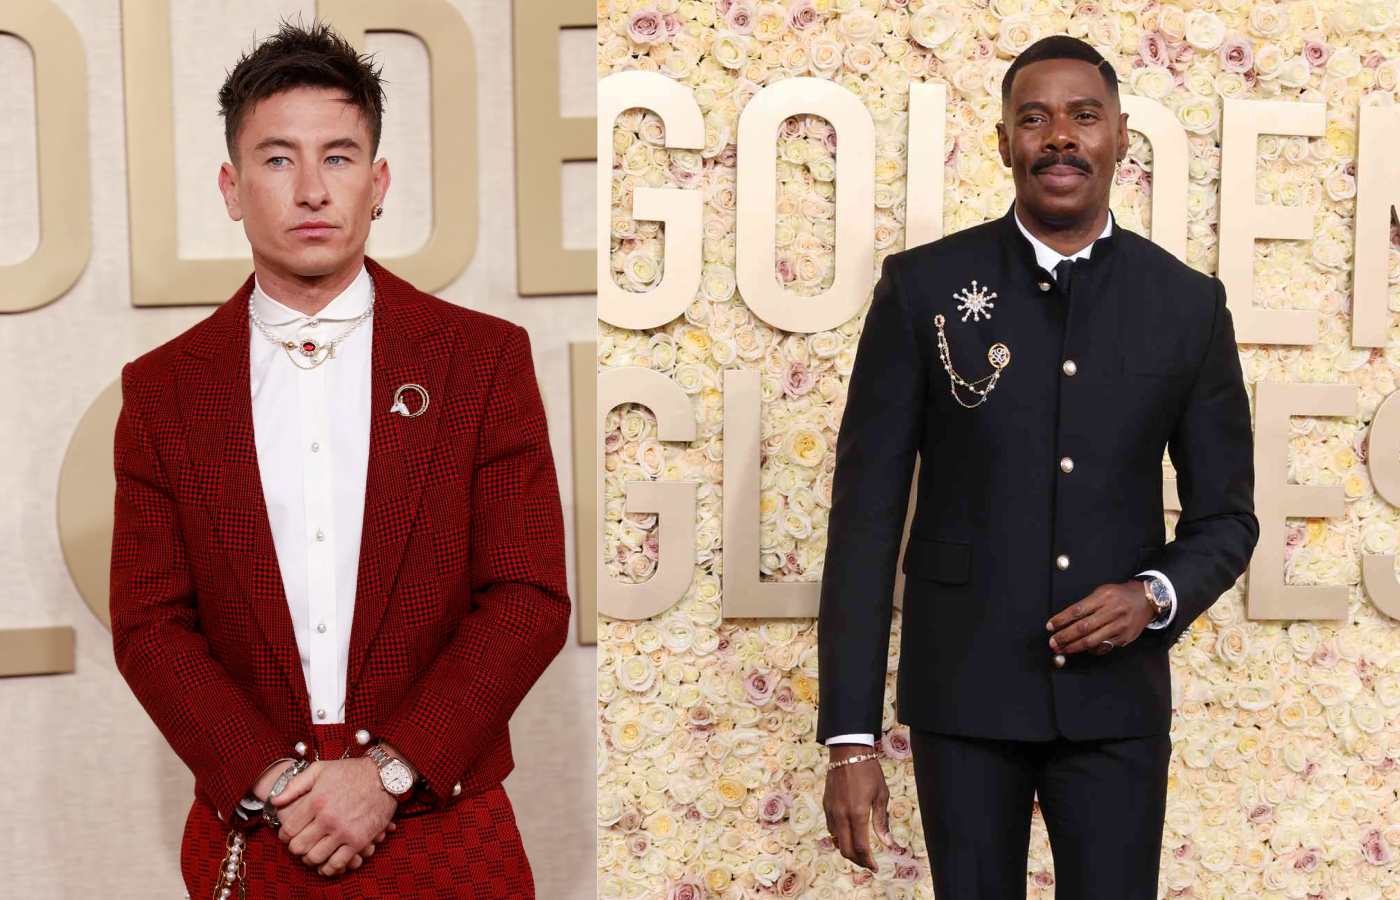 Irish actor Barry Keoghan opted for Tiffany & Co. brooches and Louis Vuitton costume jewellery, while American star Colman Domingo chose David Yurman brooches for his suit